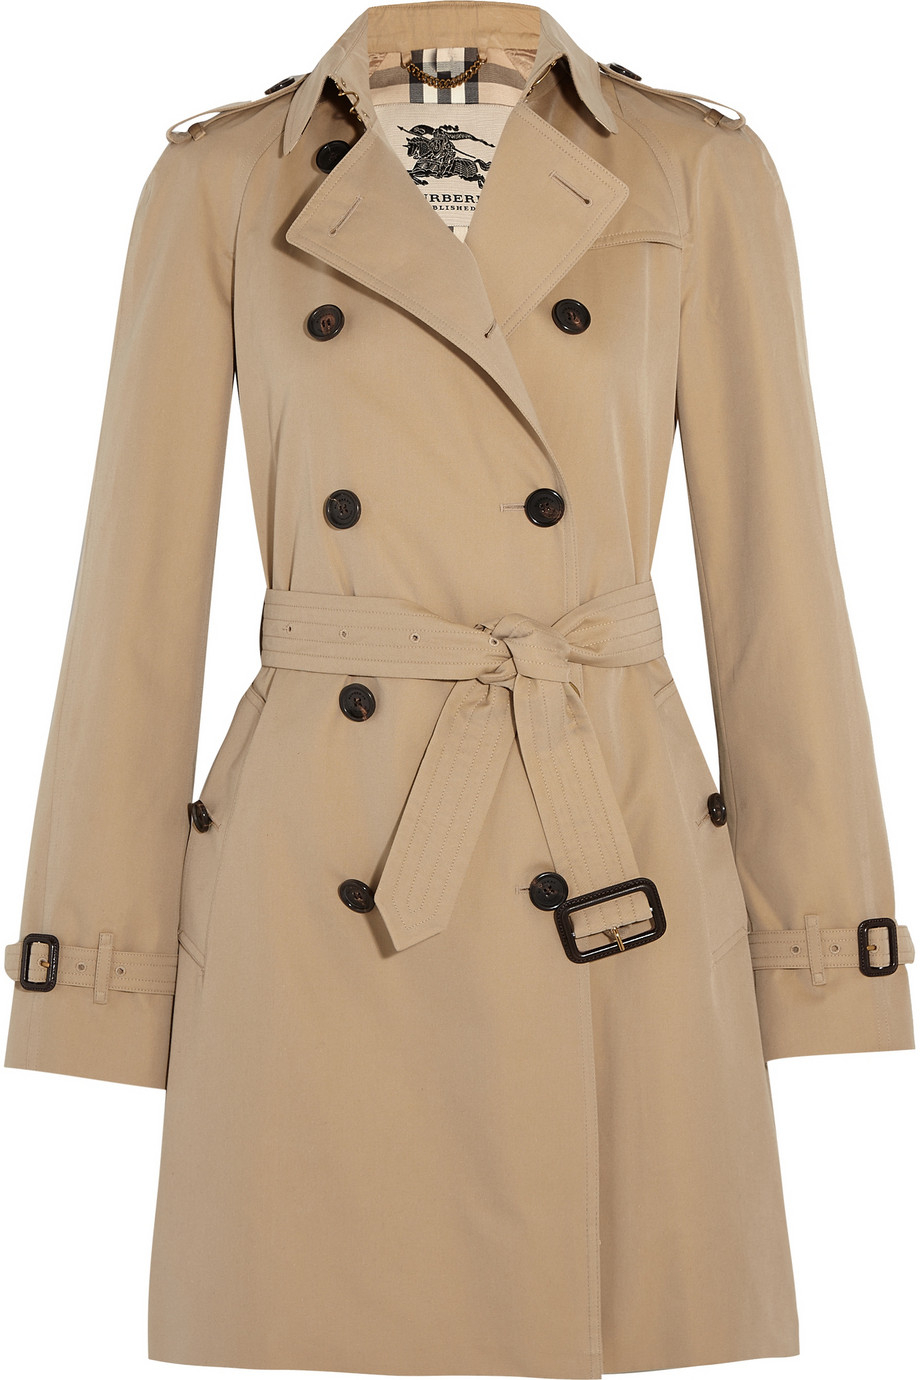 Lyst - Burberry The Westminster Mid Cotton-Gabardine Trench Coat in Natural